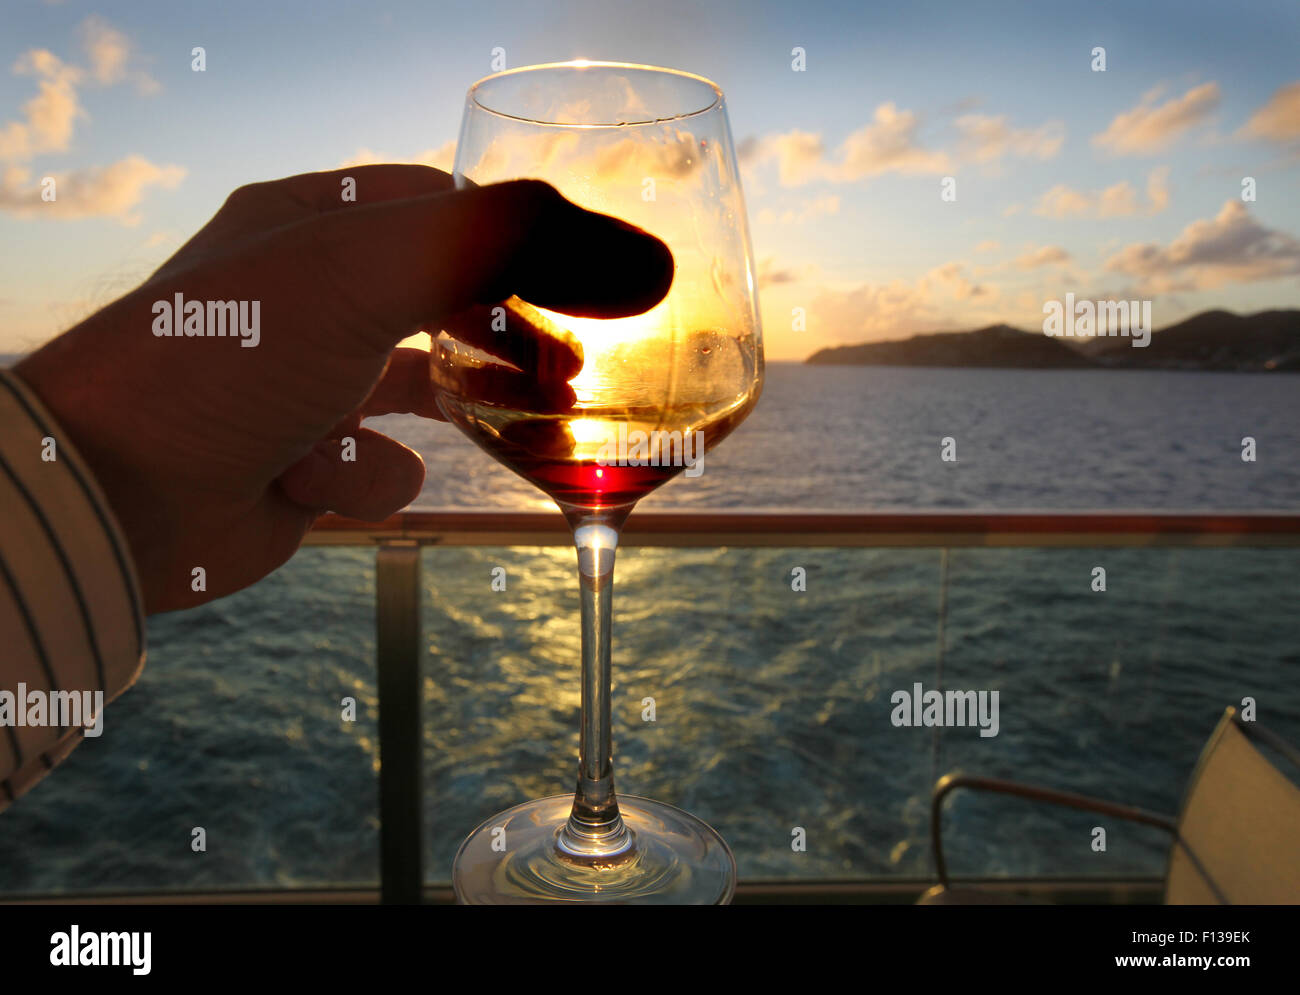 A pensioner holding a glass of wine watching the setting sun from his cruise ship balcony Stock Photo